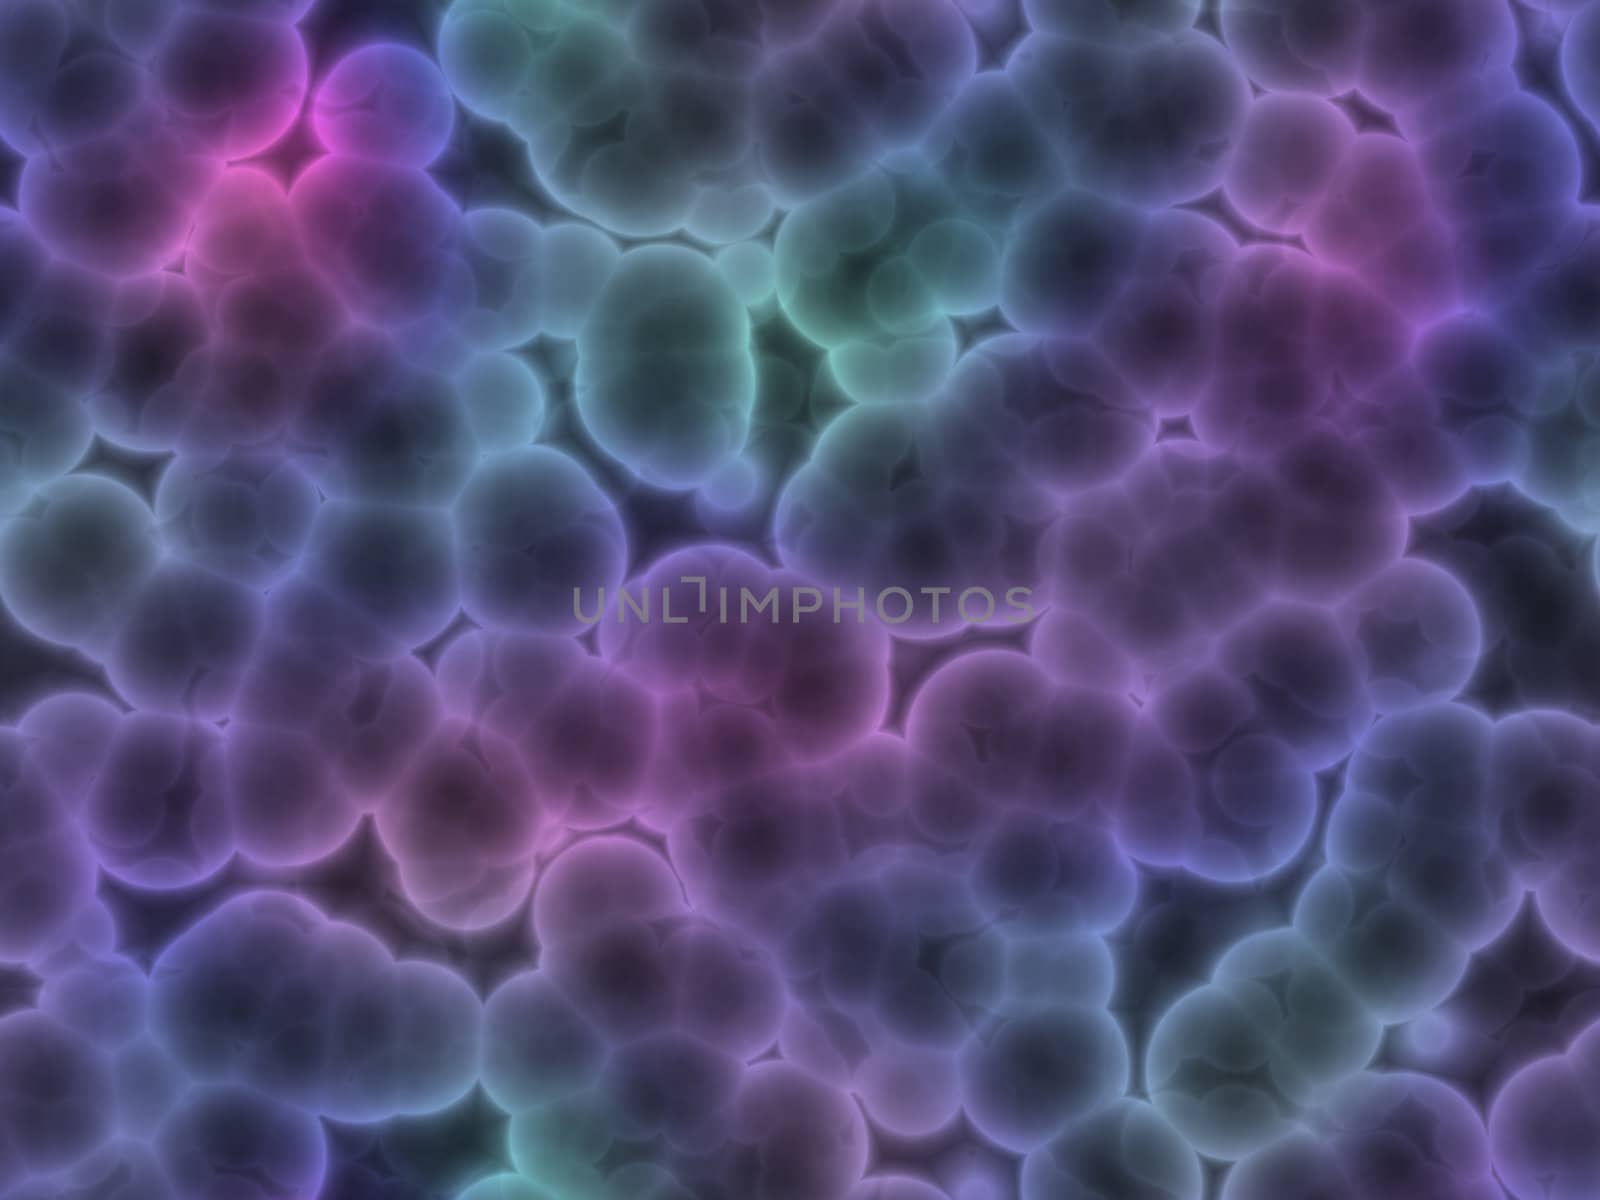 A very realistic looking illustration of some 3d cells, all clustered together.